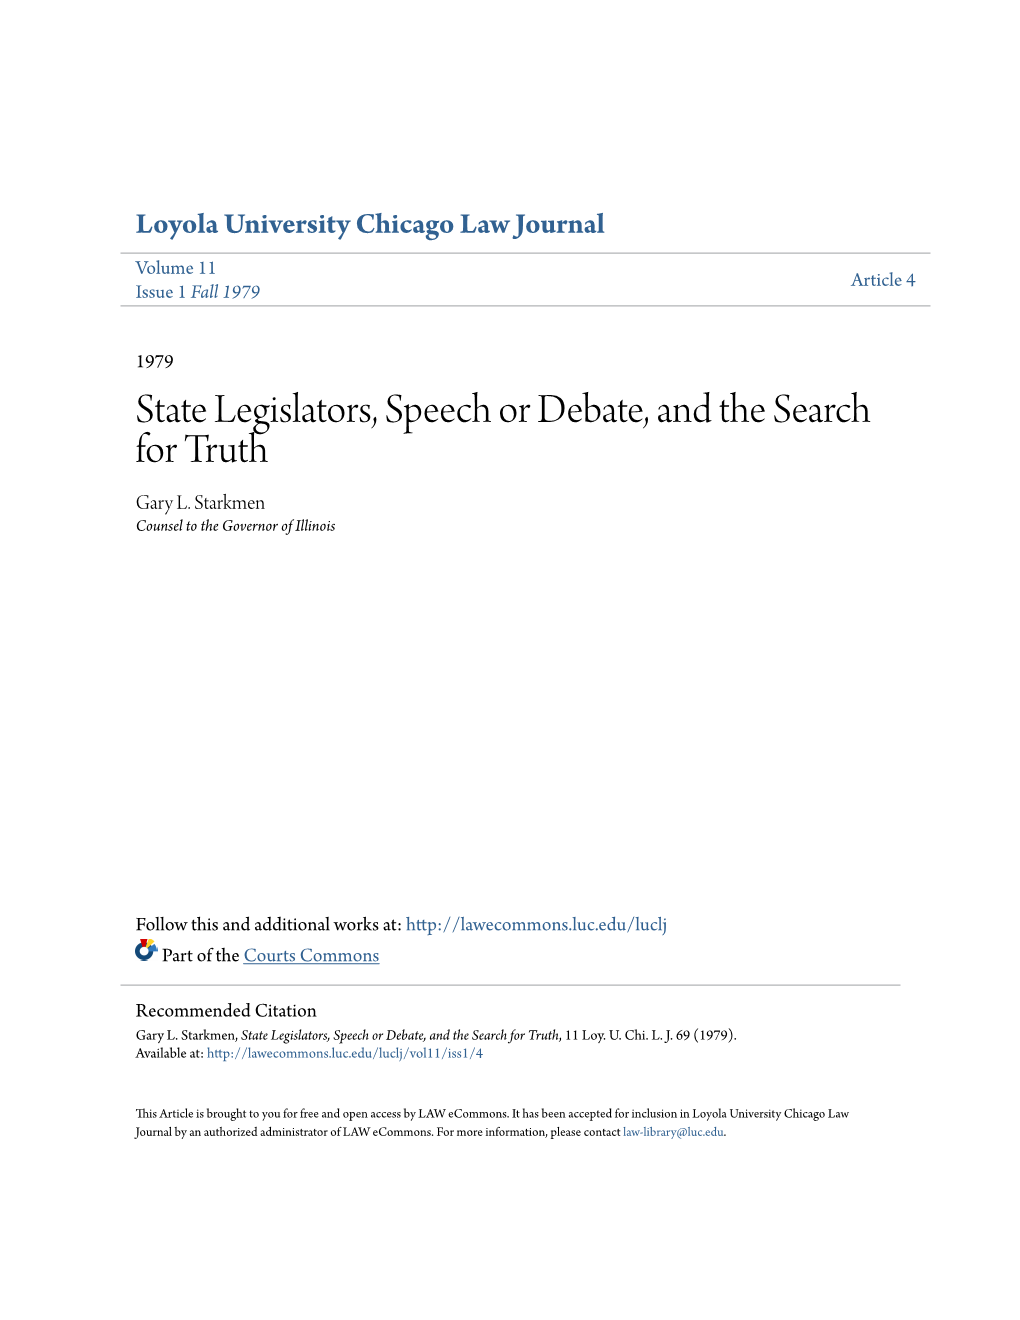 State Legislators, Speech Or Debate, and the Search for Truth Gary L